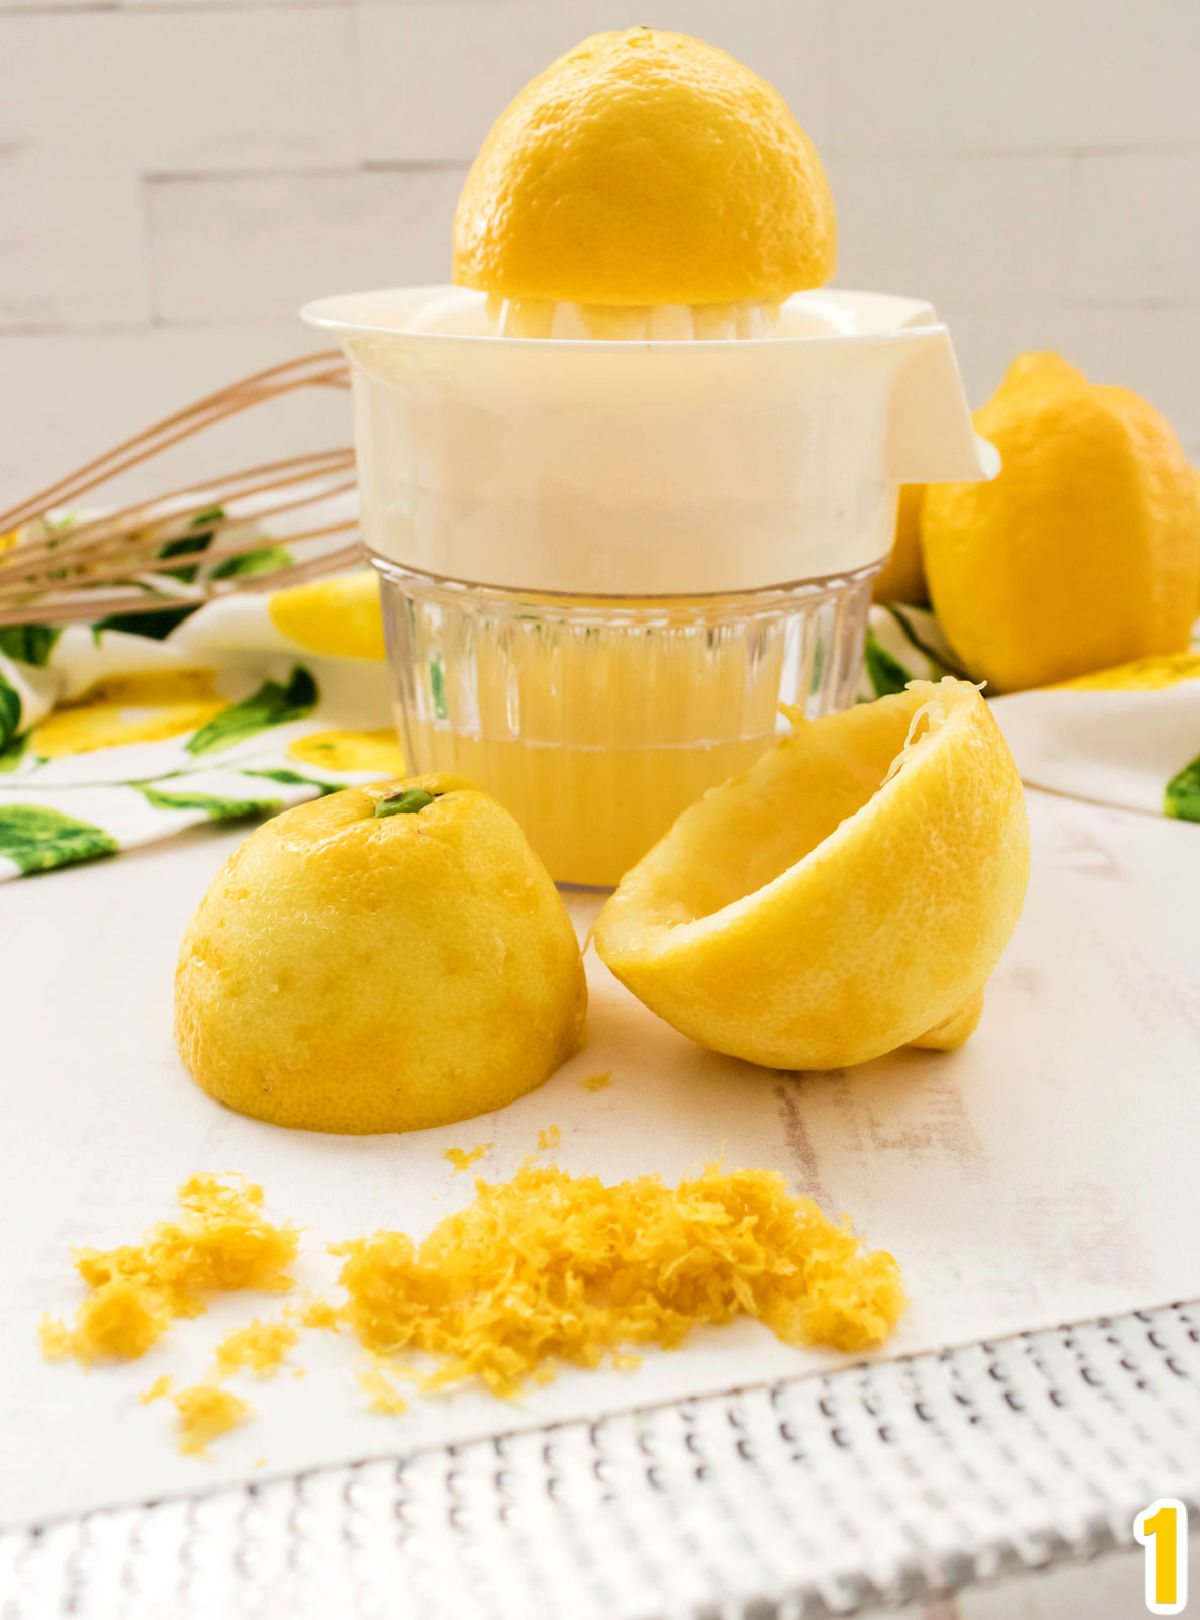 Close up of a Lemon Juicer filled with lemon juice, a microplane that zested the lemons, a whisk and some fresh lemons.